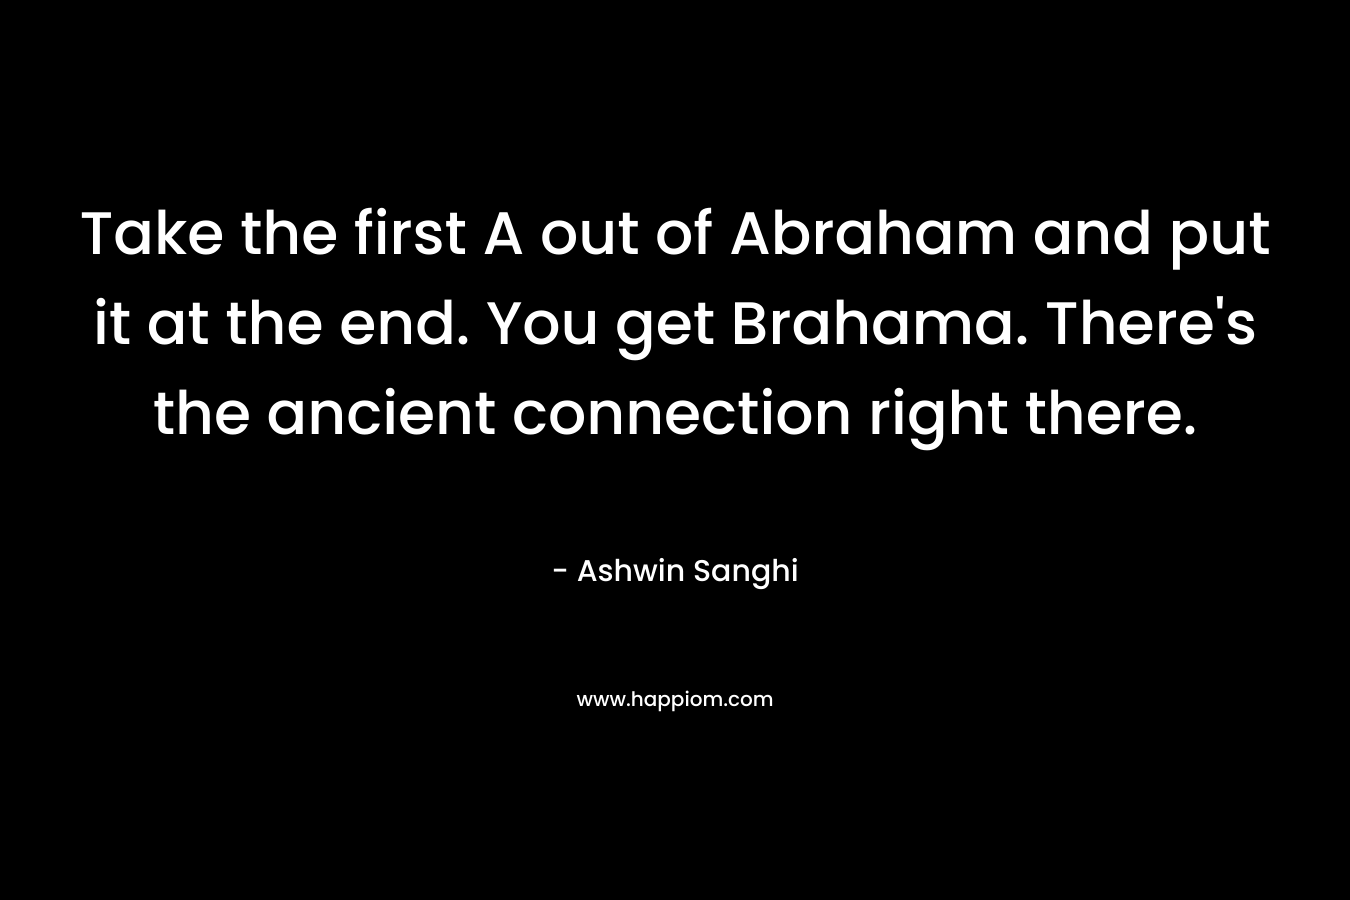 Take the first A out of Abraham and put it at the end. You get Brahama. There's the ancient connection right there.